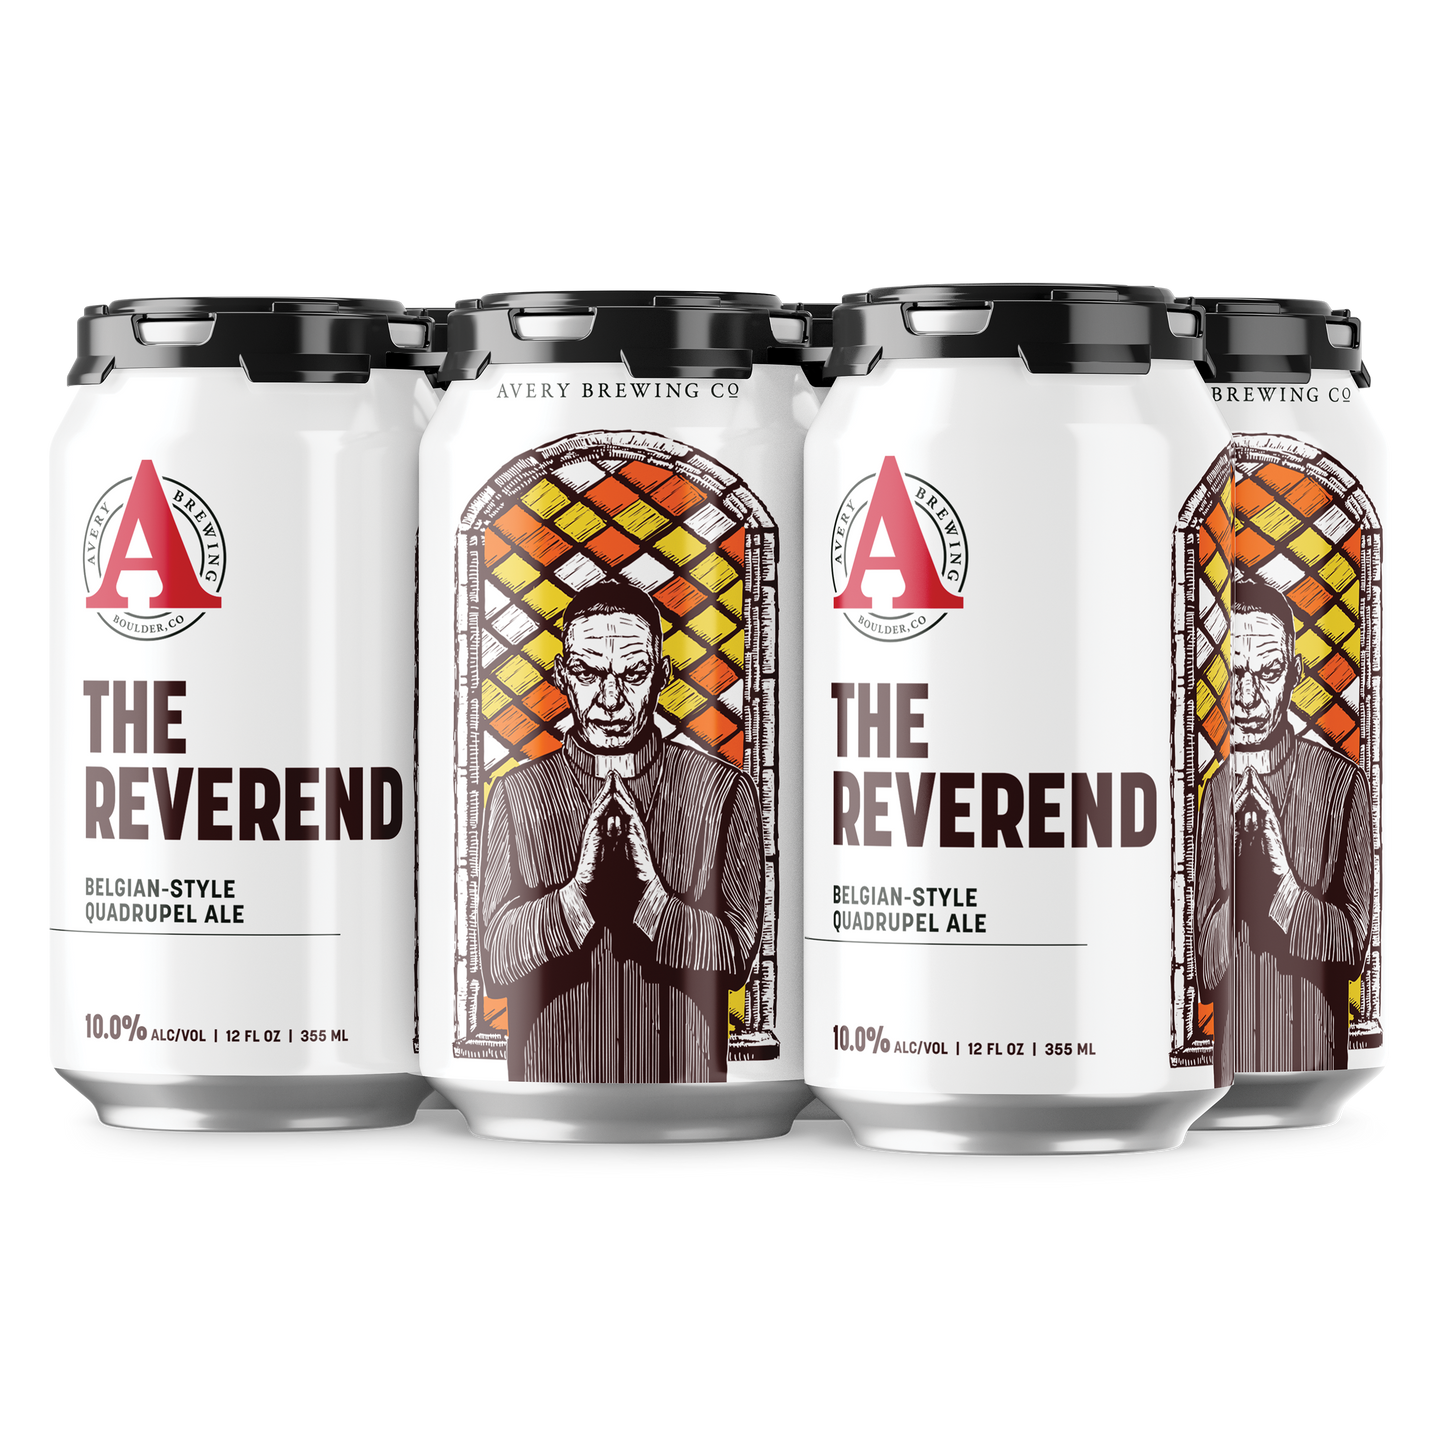 Avery Brewing 'The Reverend' Belgian Style Quadruple Ale